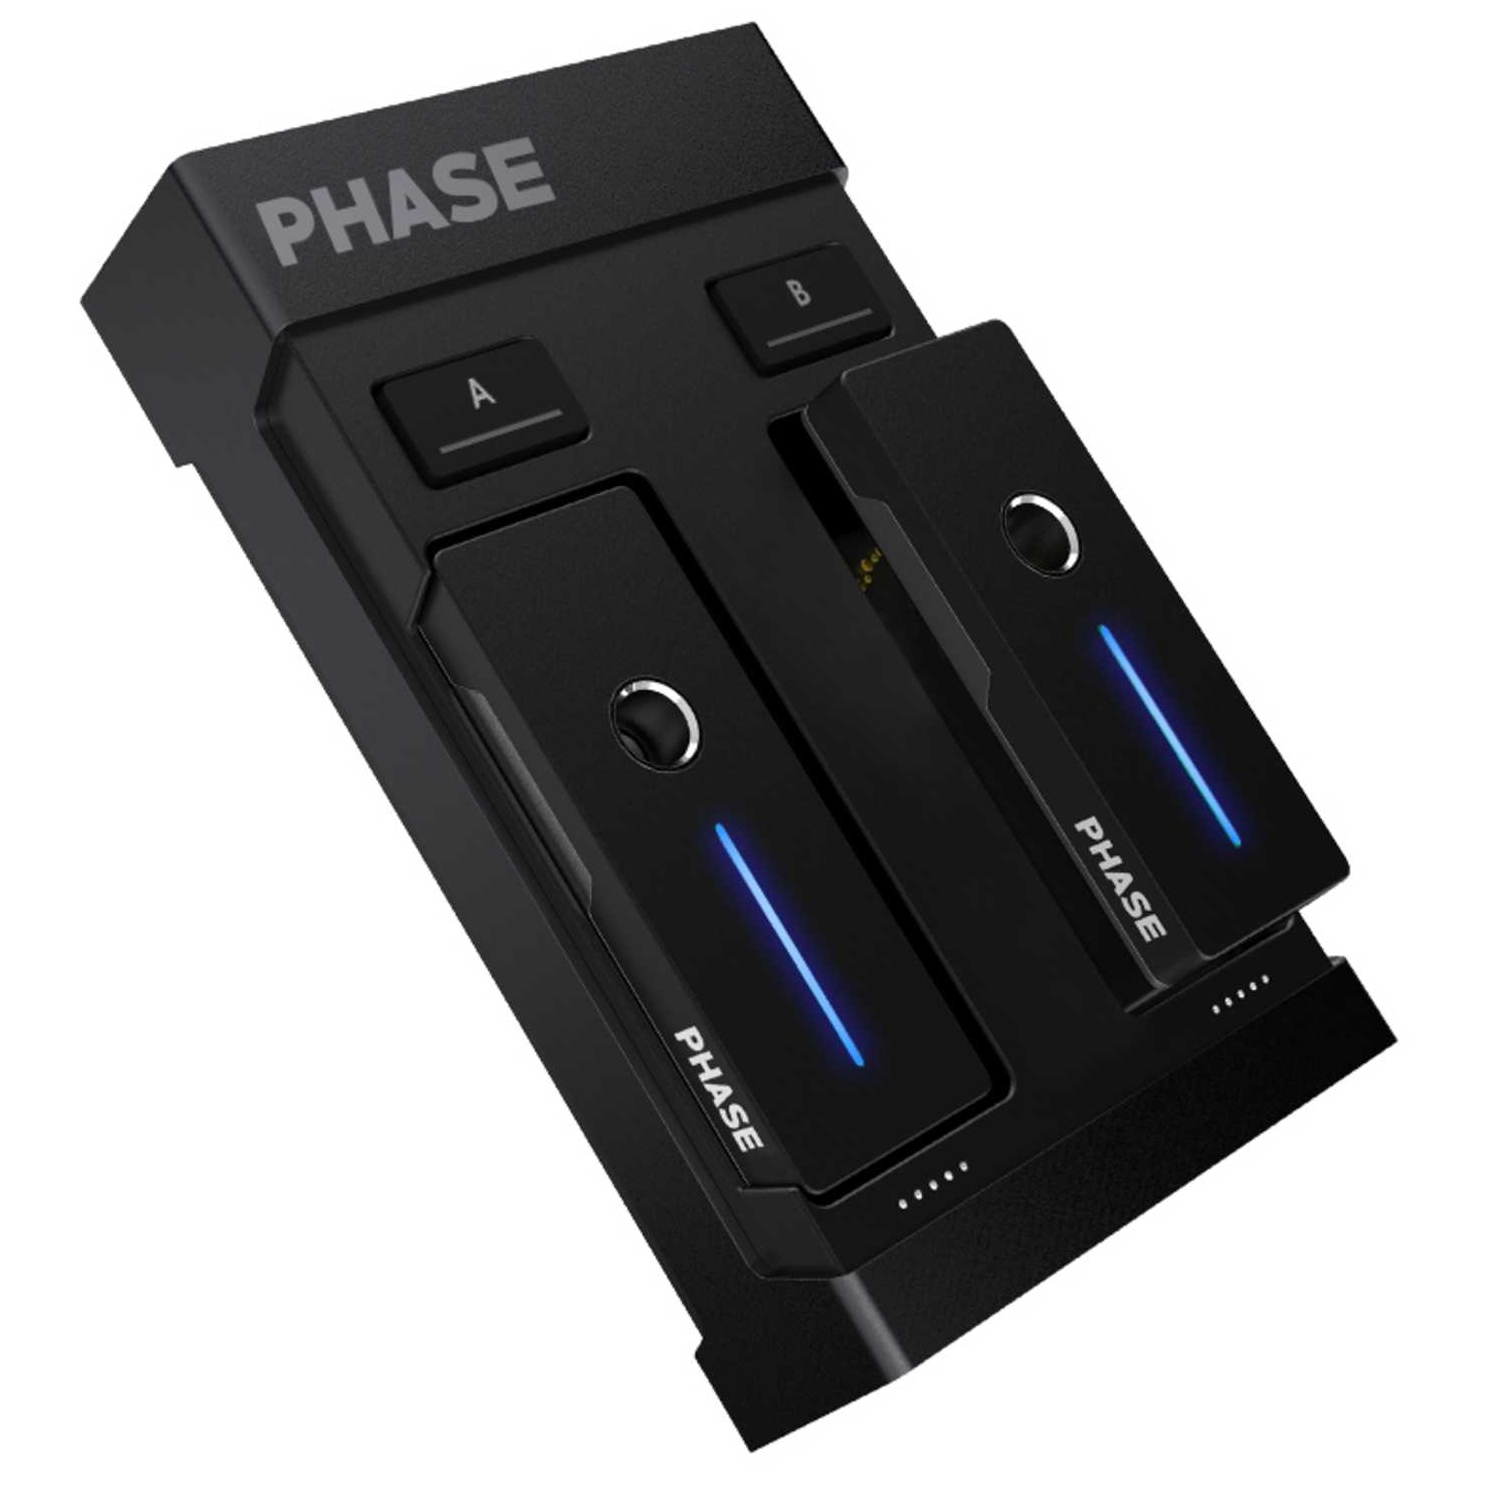 Phase Phase Essential B-Ware